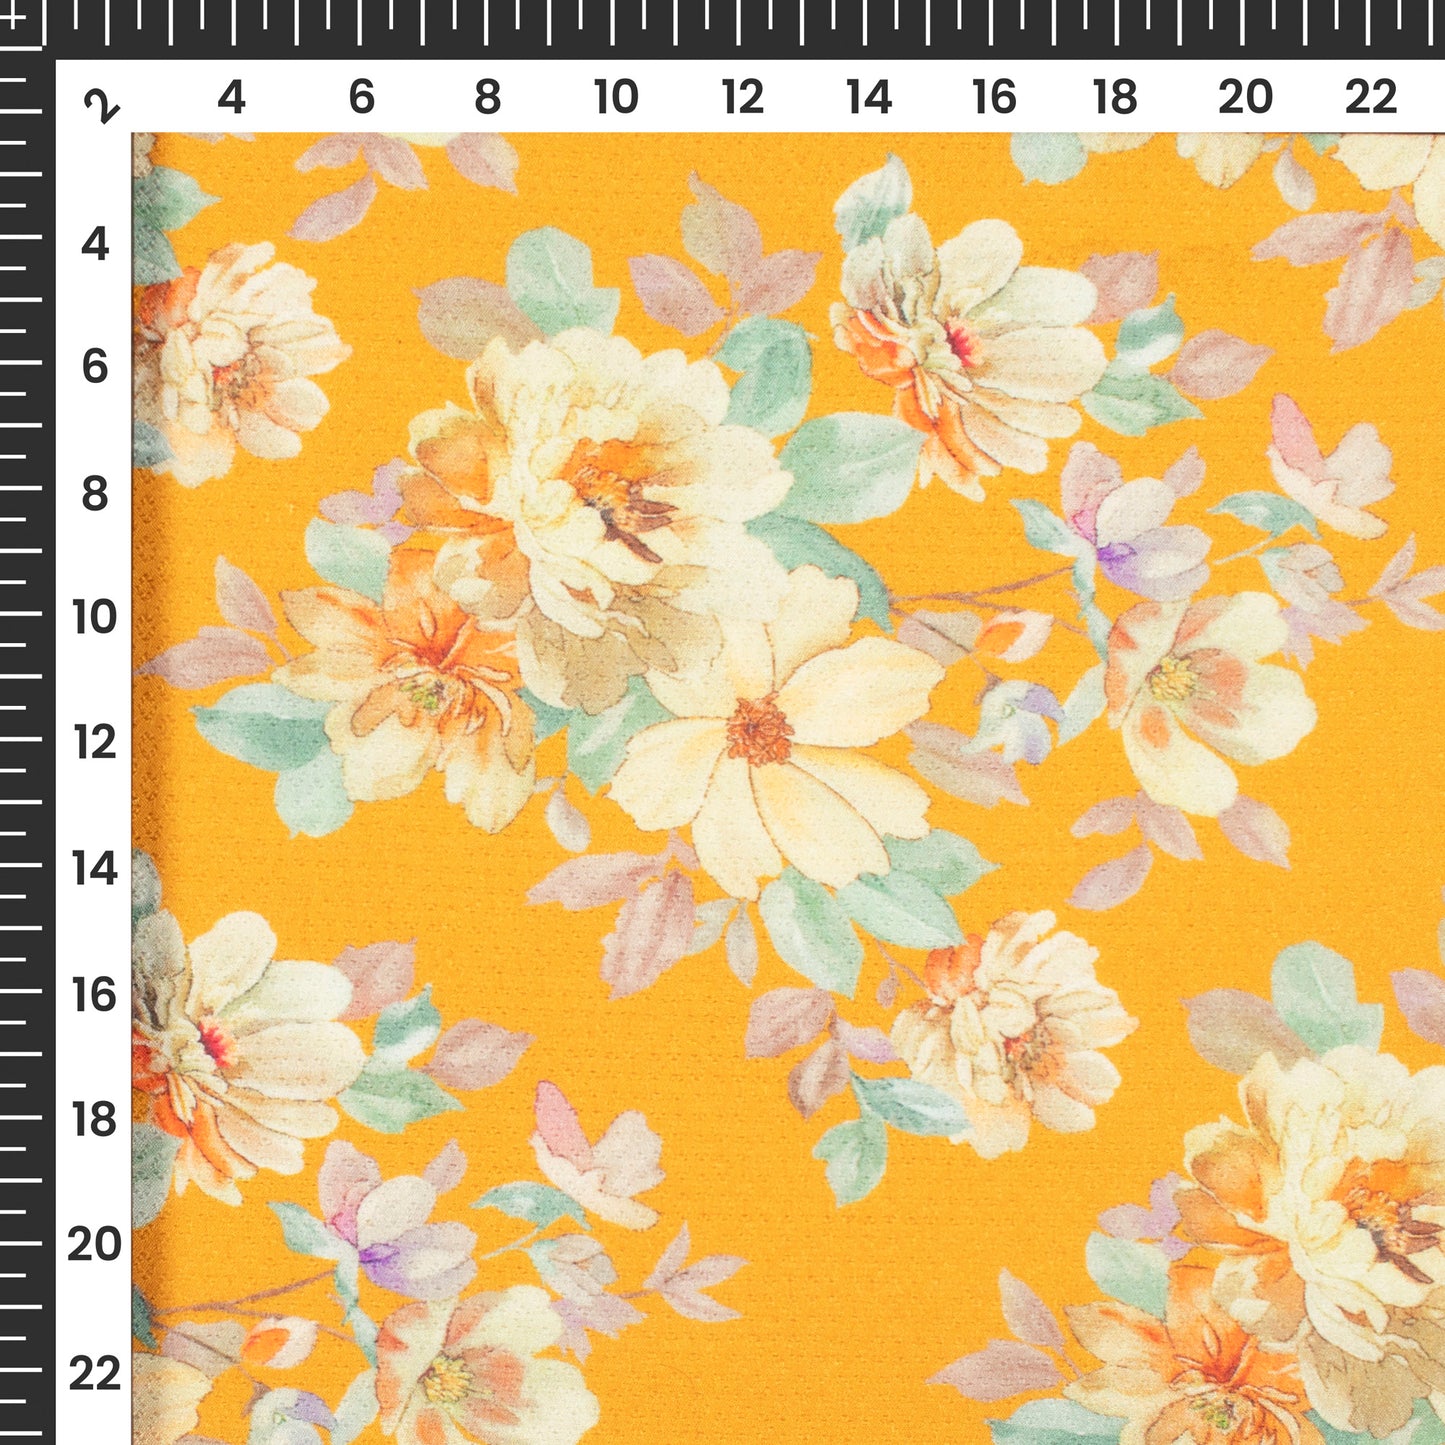 Butter Yellow Floral Printed Sustainable Eucalyptus Fabric